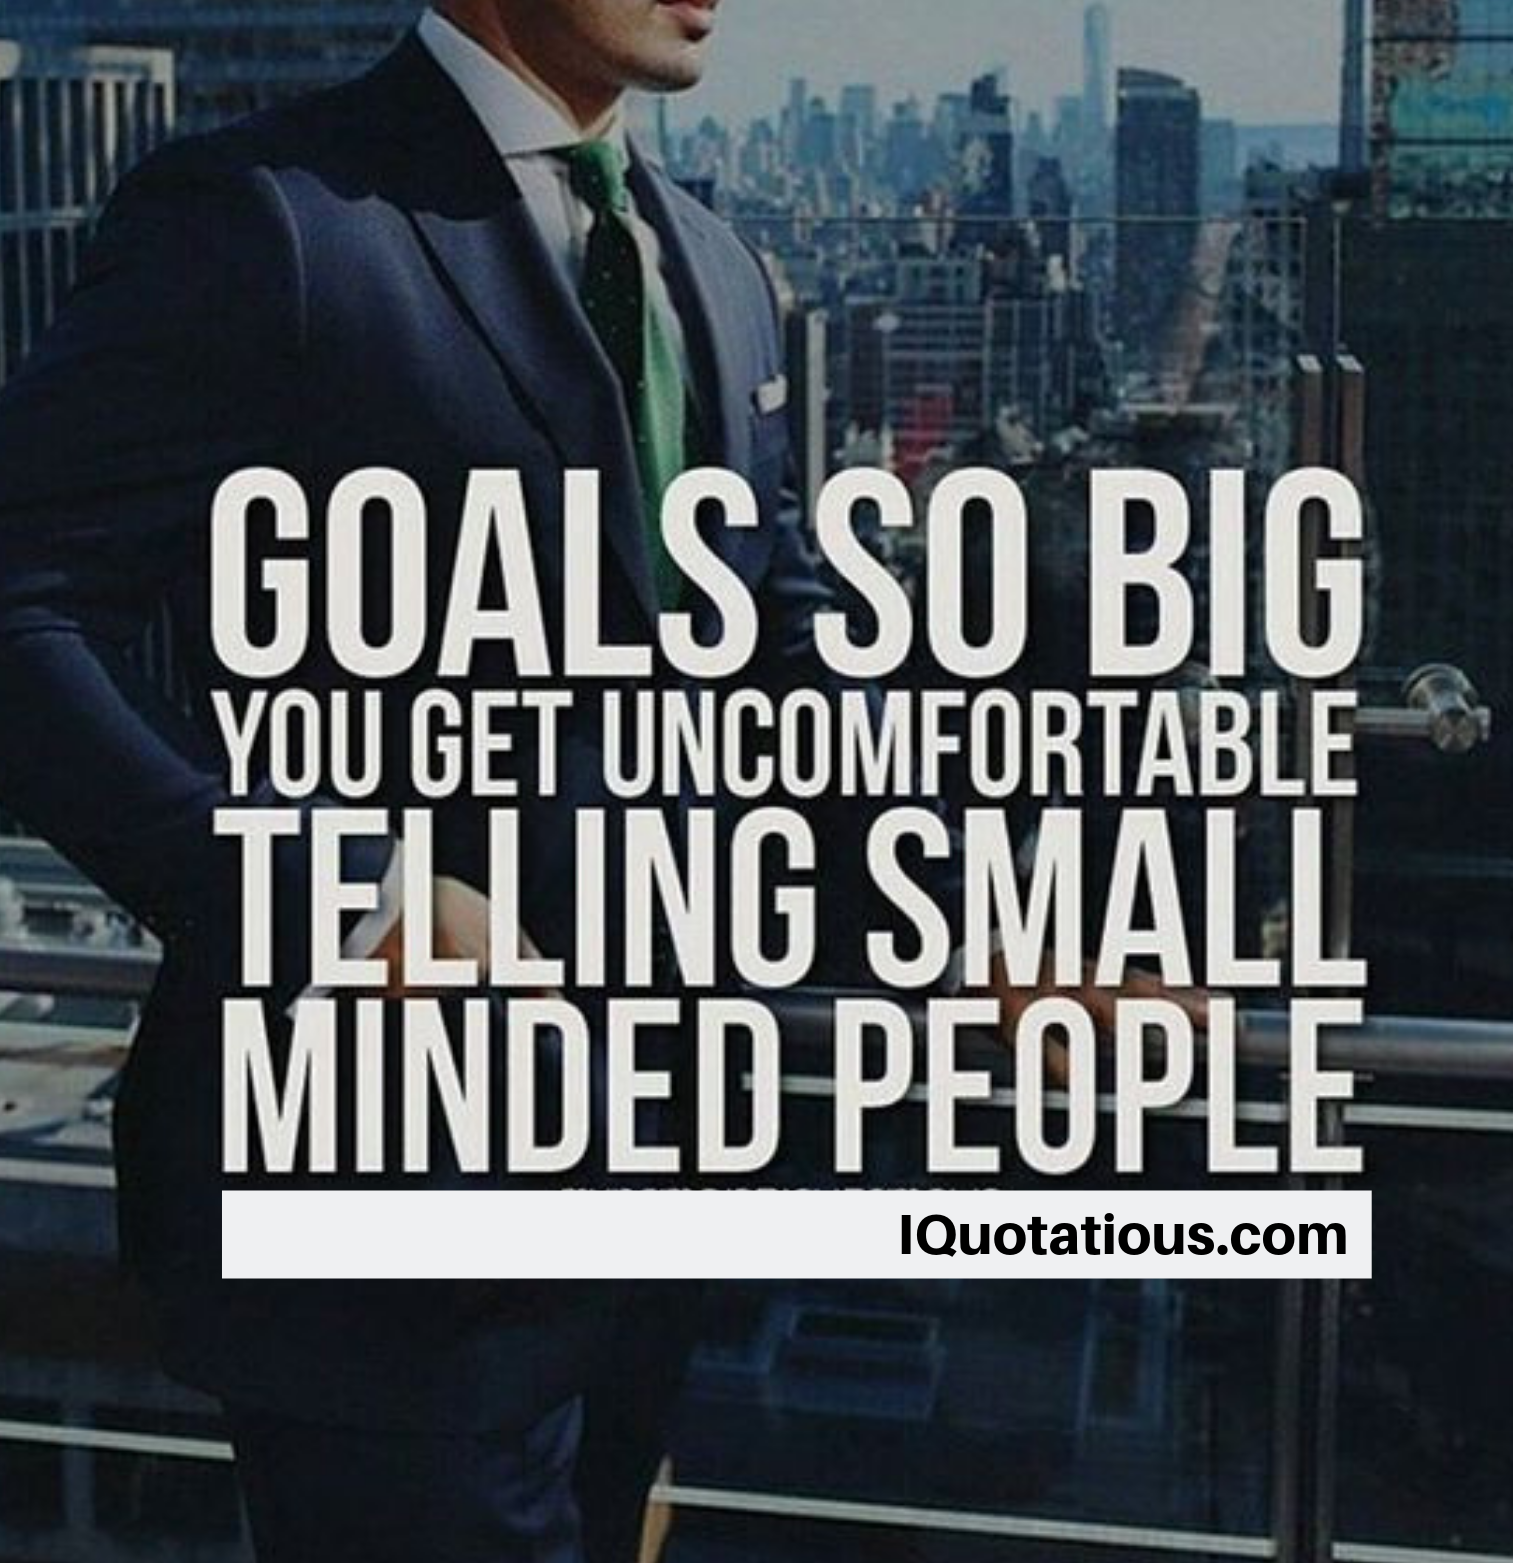 Goals so big you get uncomfortable telling small minded people